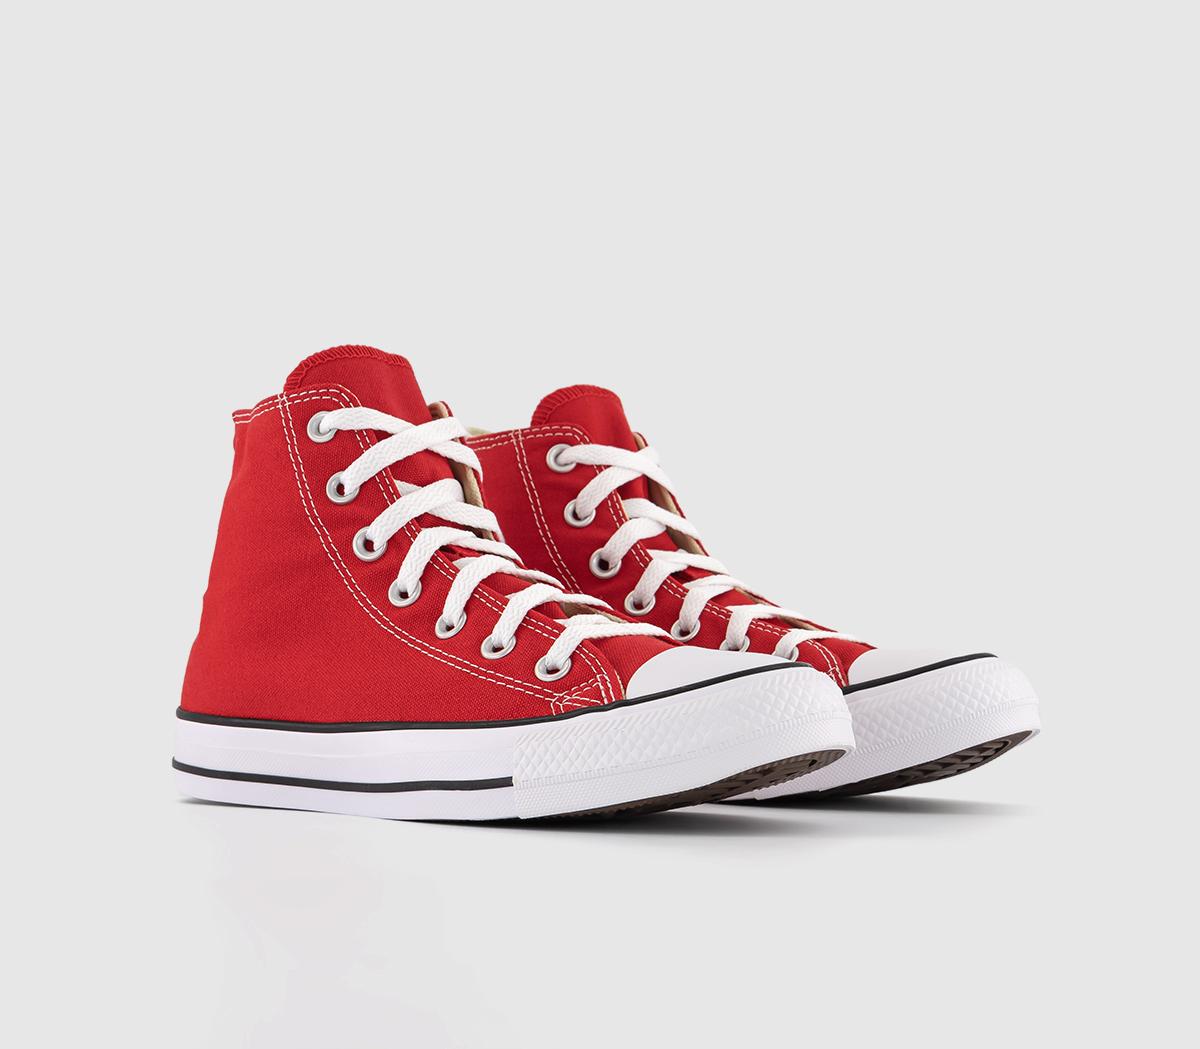 Mens Converse All Star Hi Red Canvas Trainers, 8